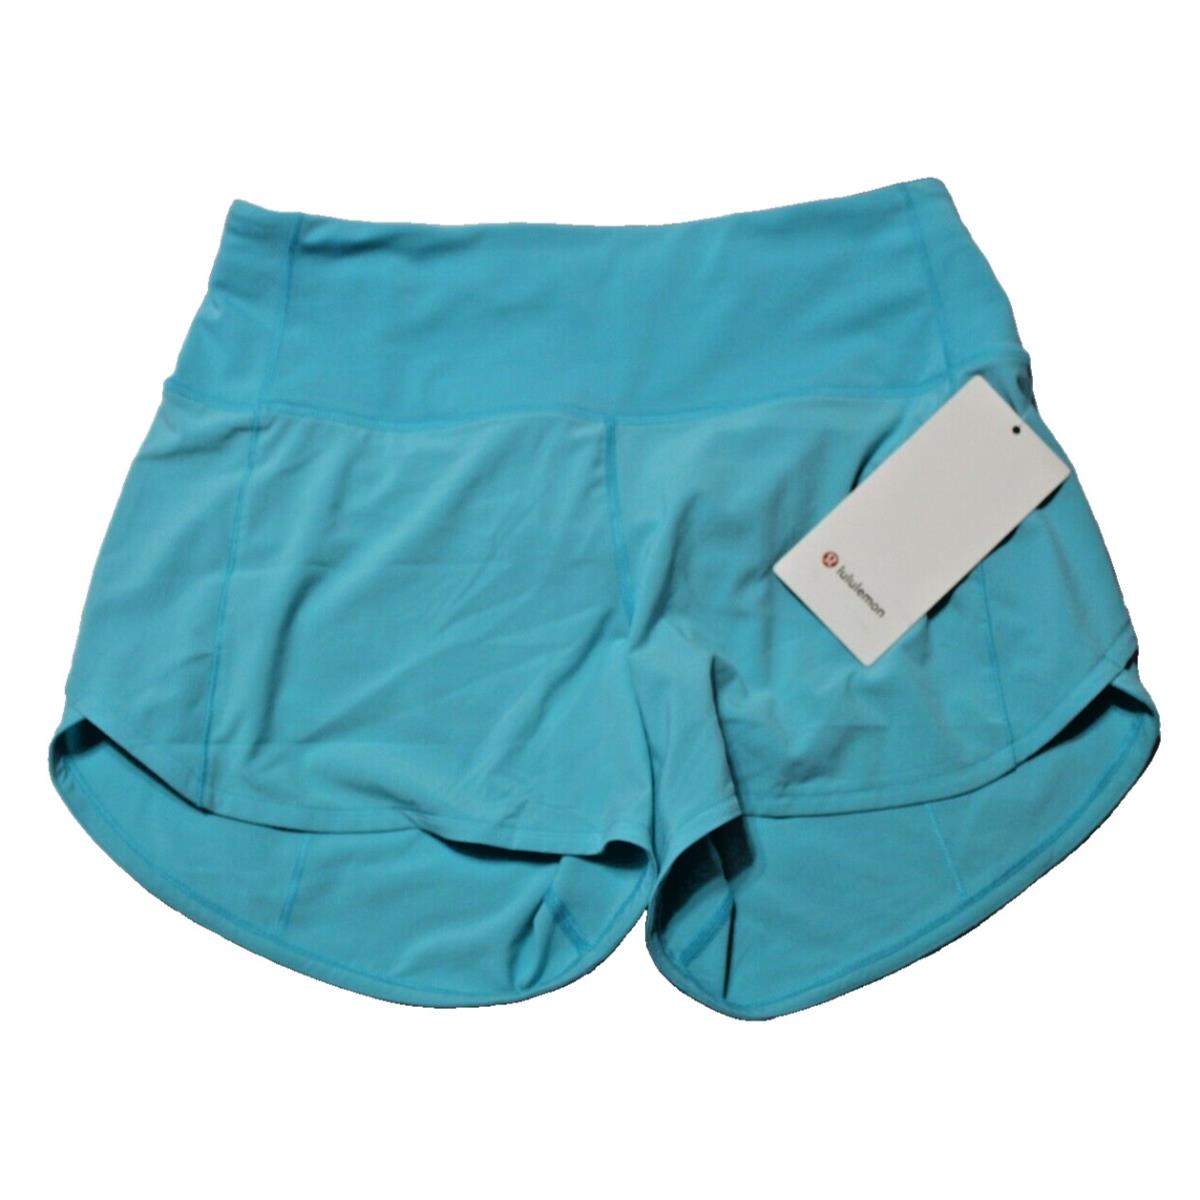 Women`s Lululemon Speed Up Short HR 4 Lined - Electric Turquoise - Size 6